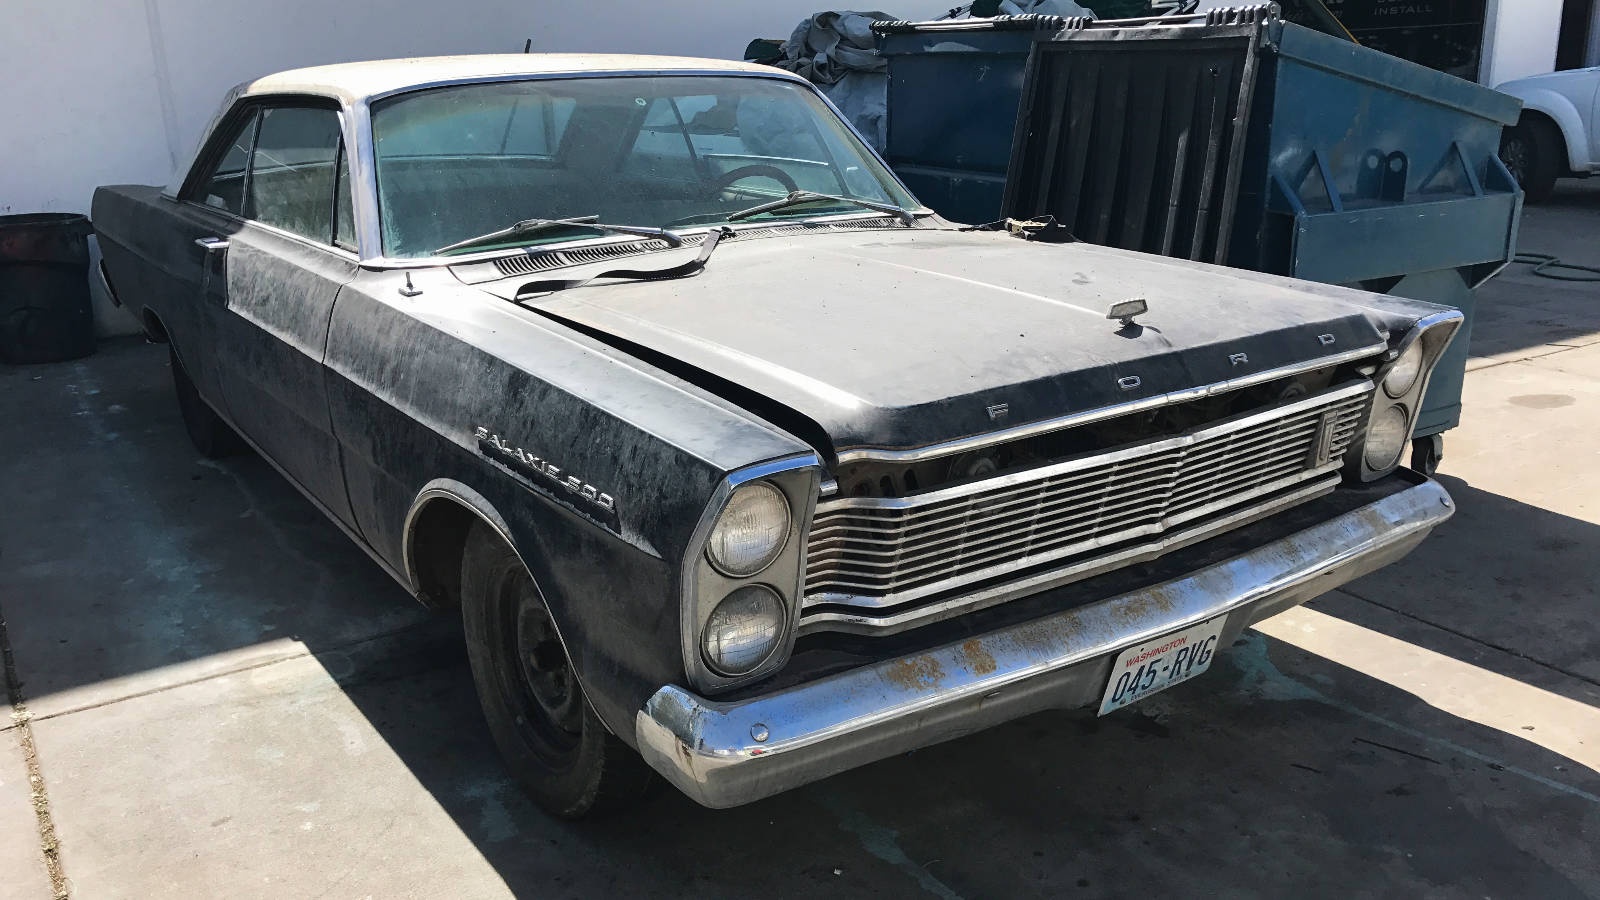 Exclusive 1965 Ford Galaxie 500